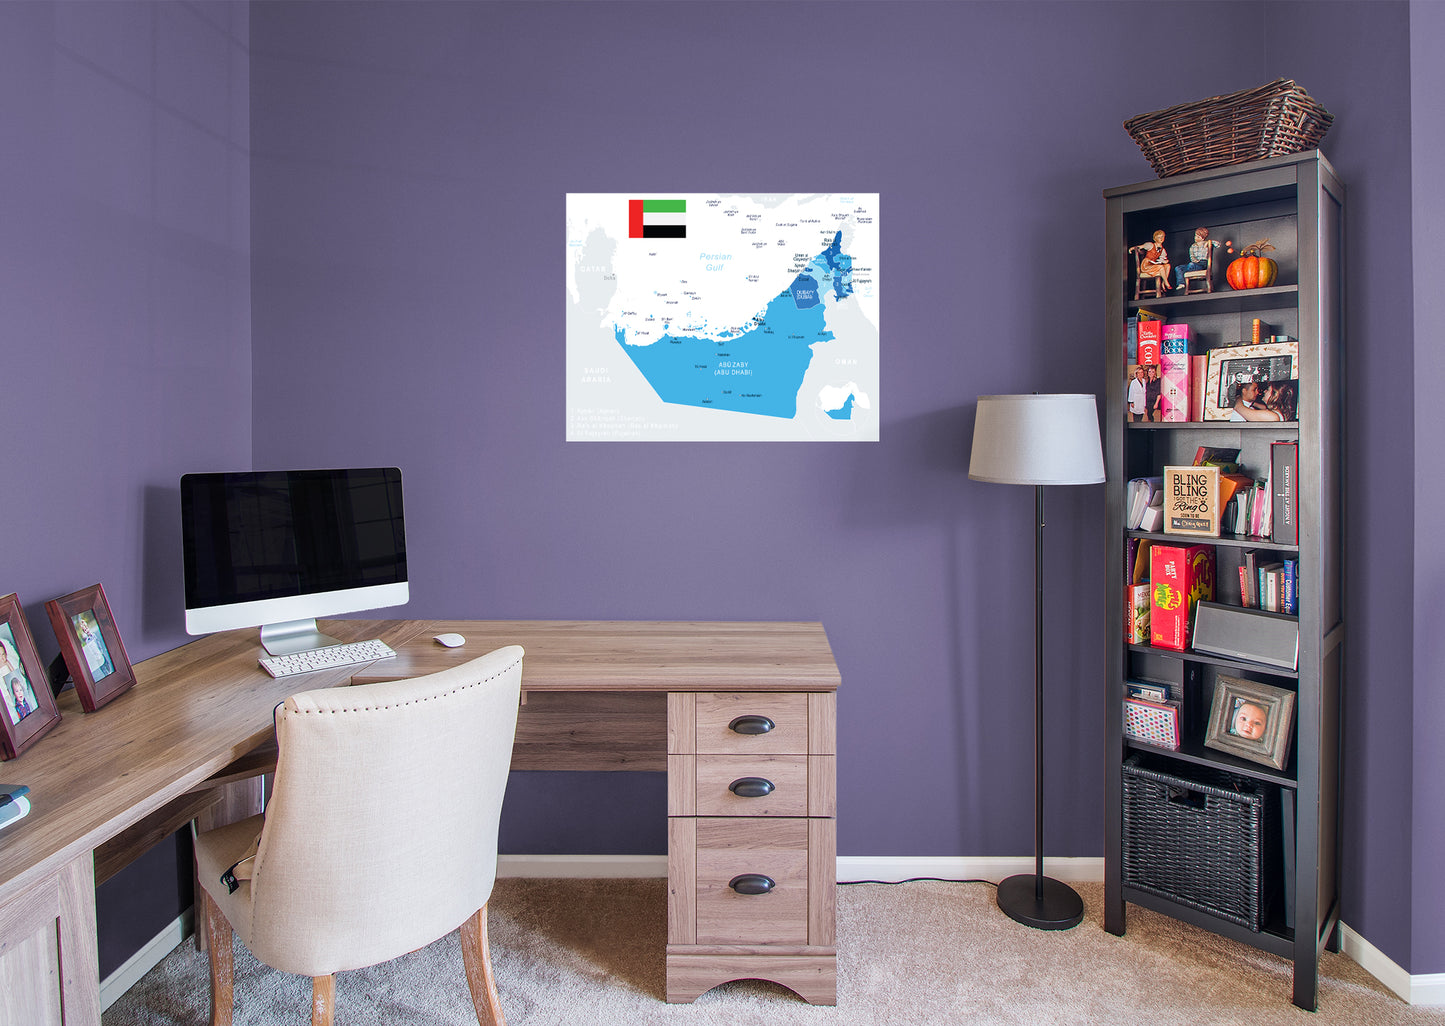 Maps of Asia: United Arab Emirates Mural        -   Removable Wall   Adhesive Decal